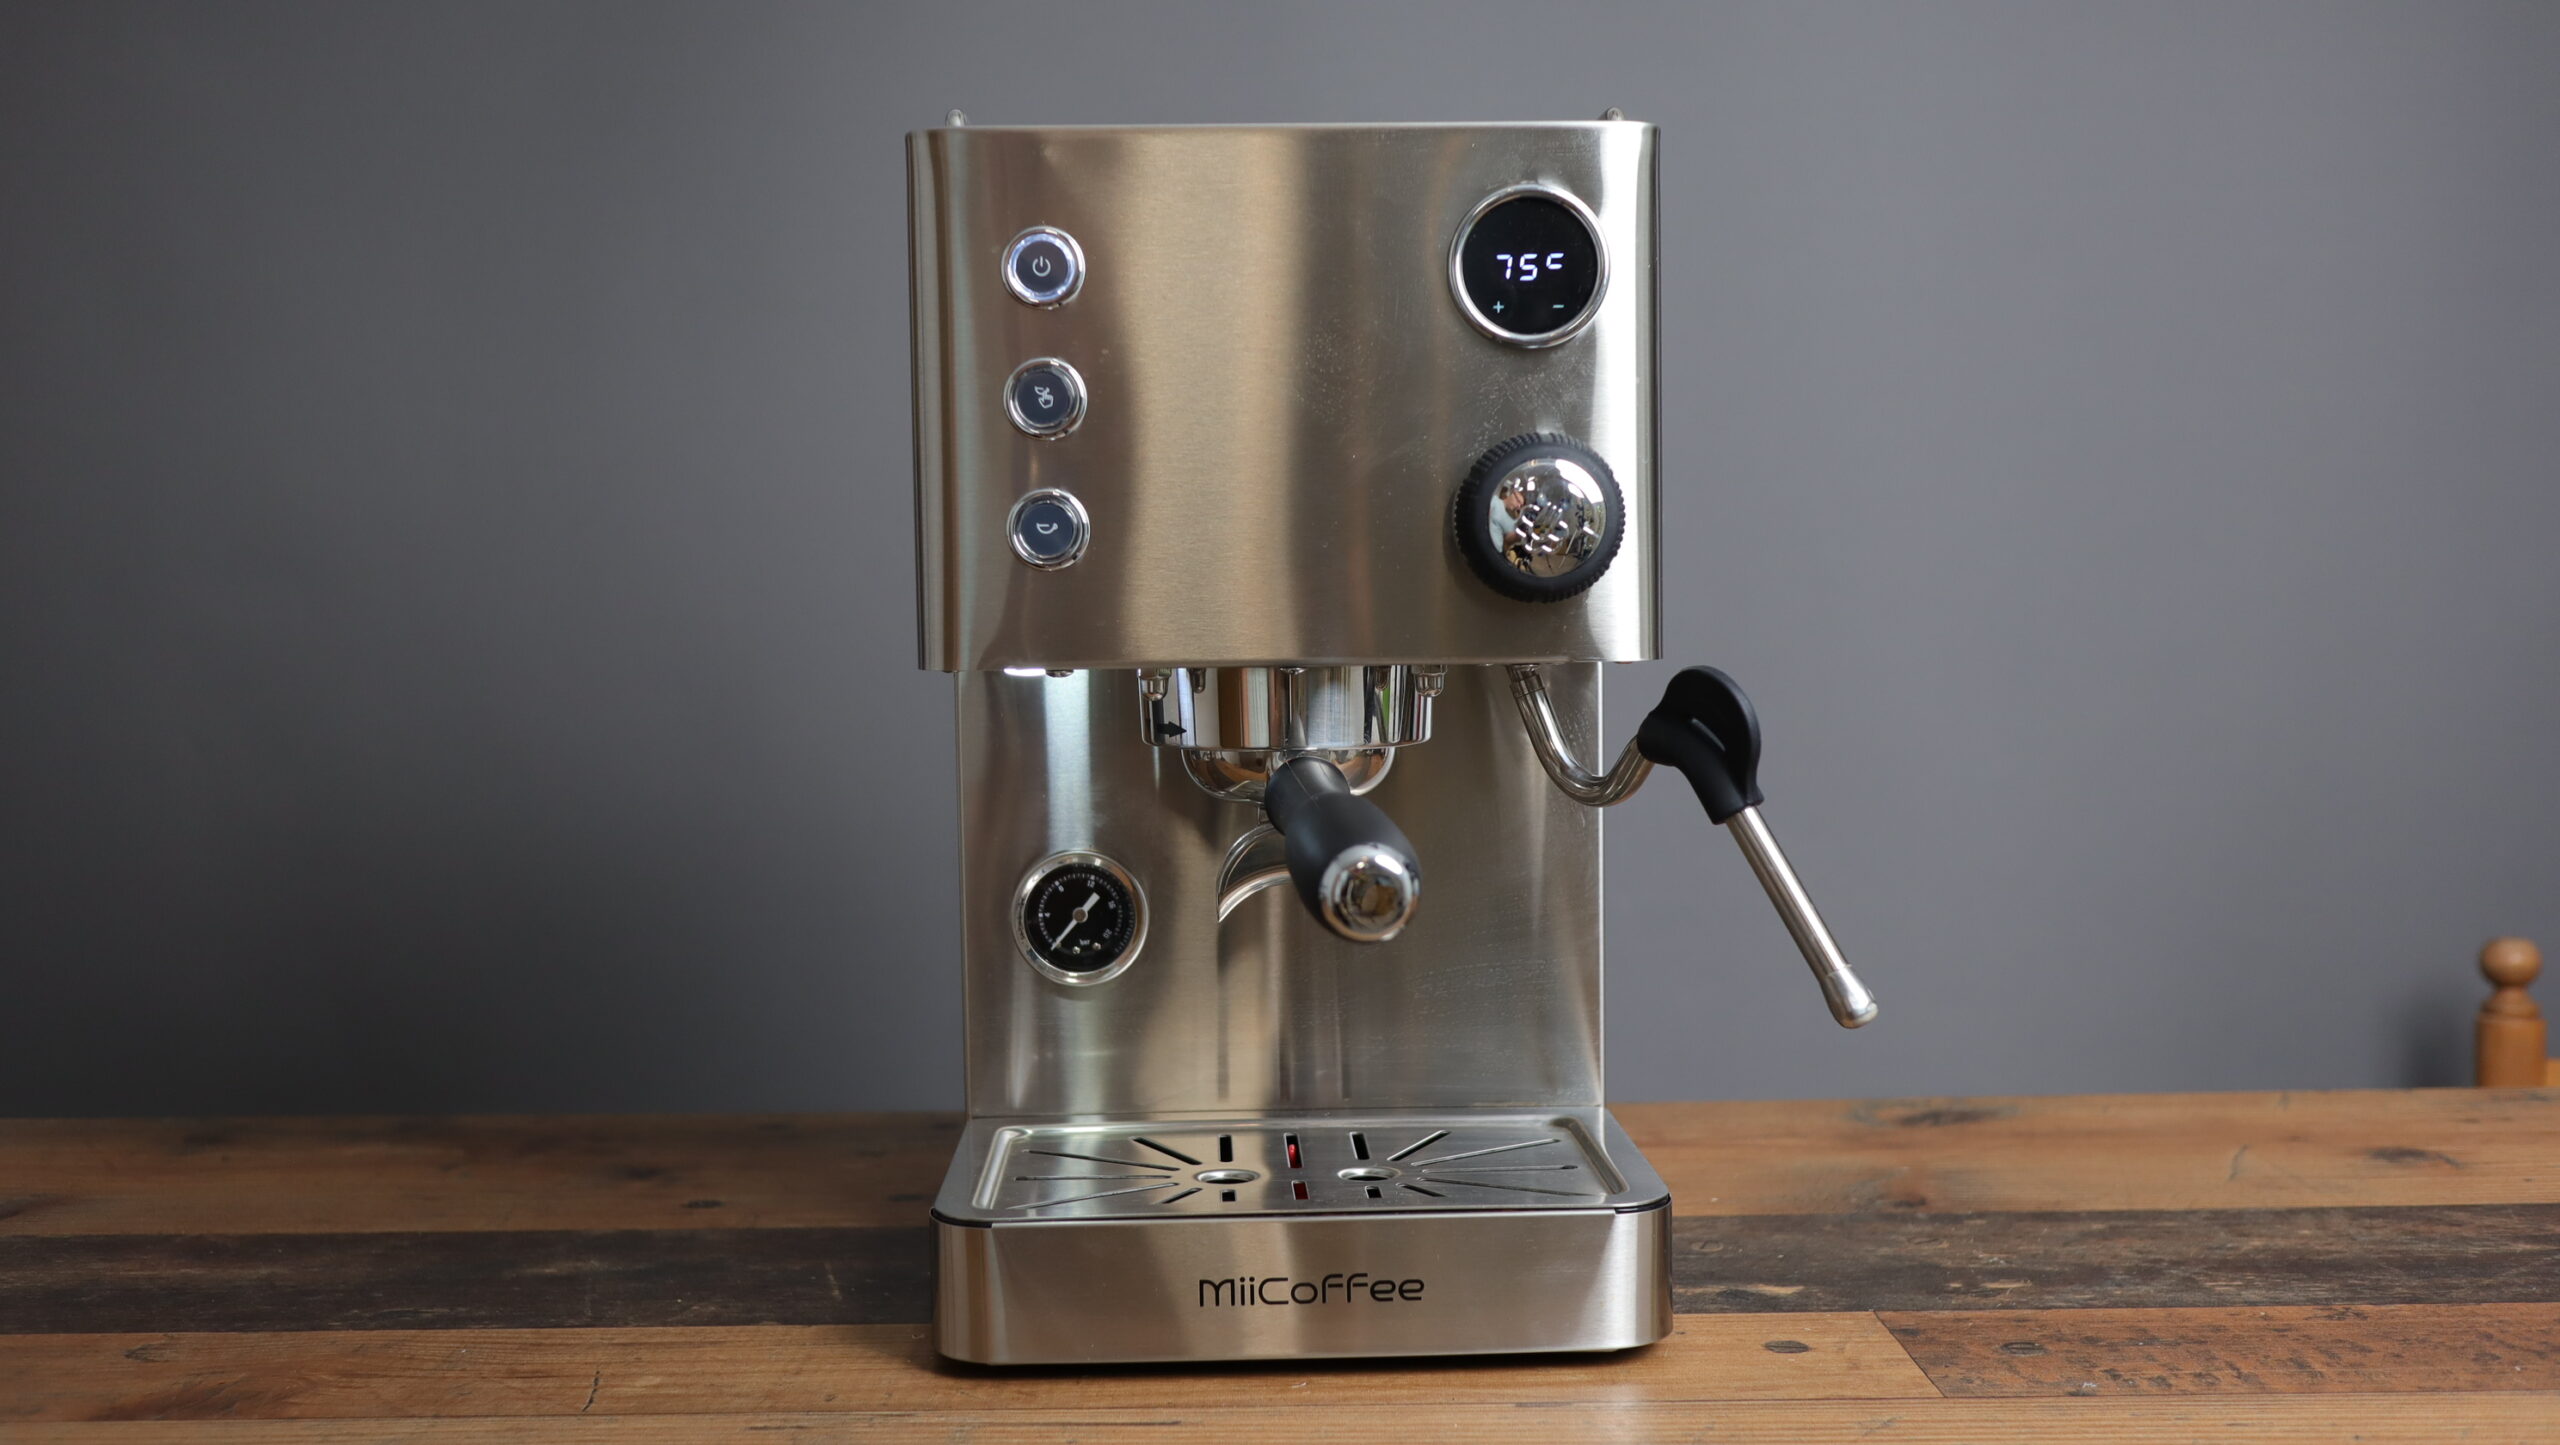 The MiiCoffee Apex espresso machine, with PID, 58mm brew group, manometer, and 3 control buttons